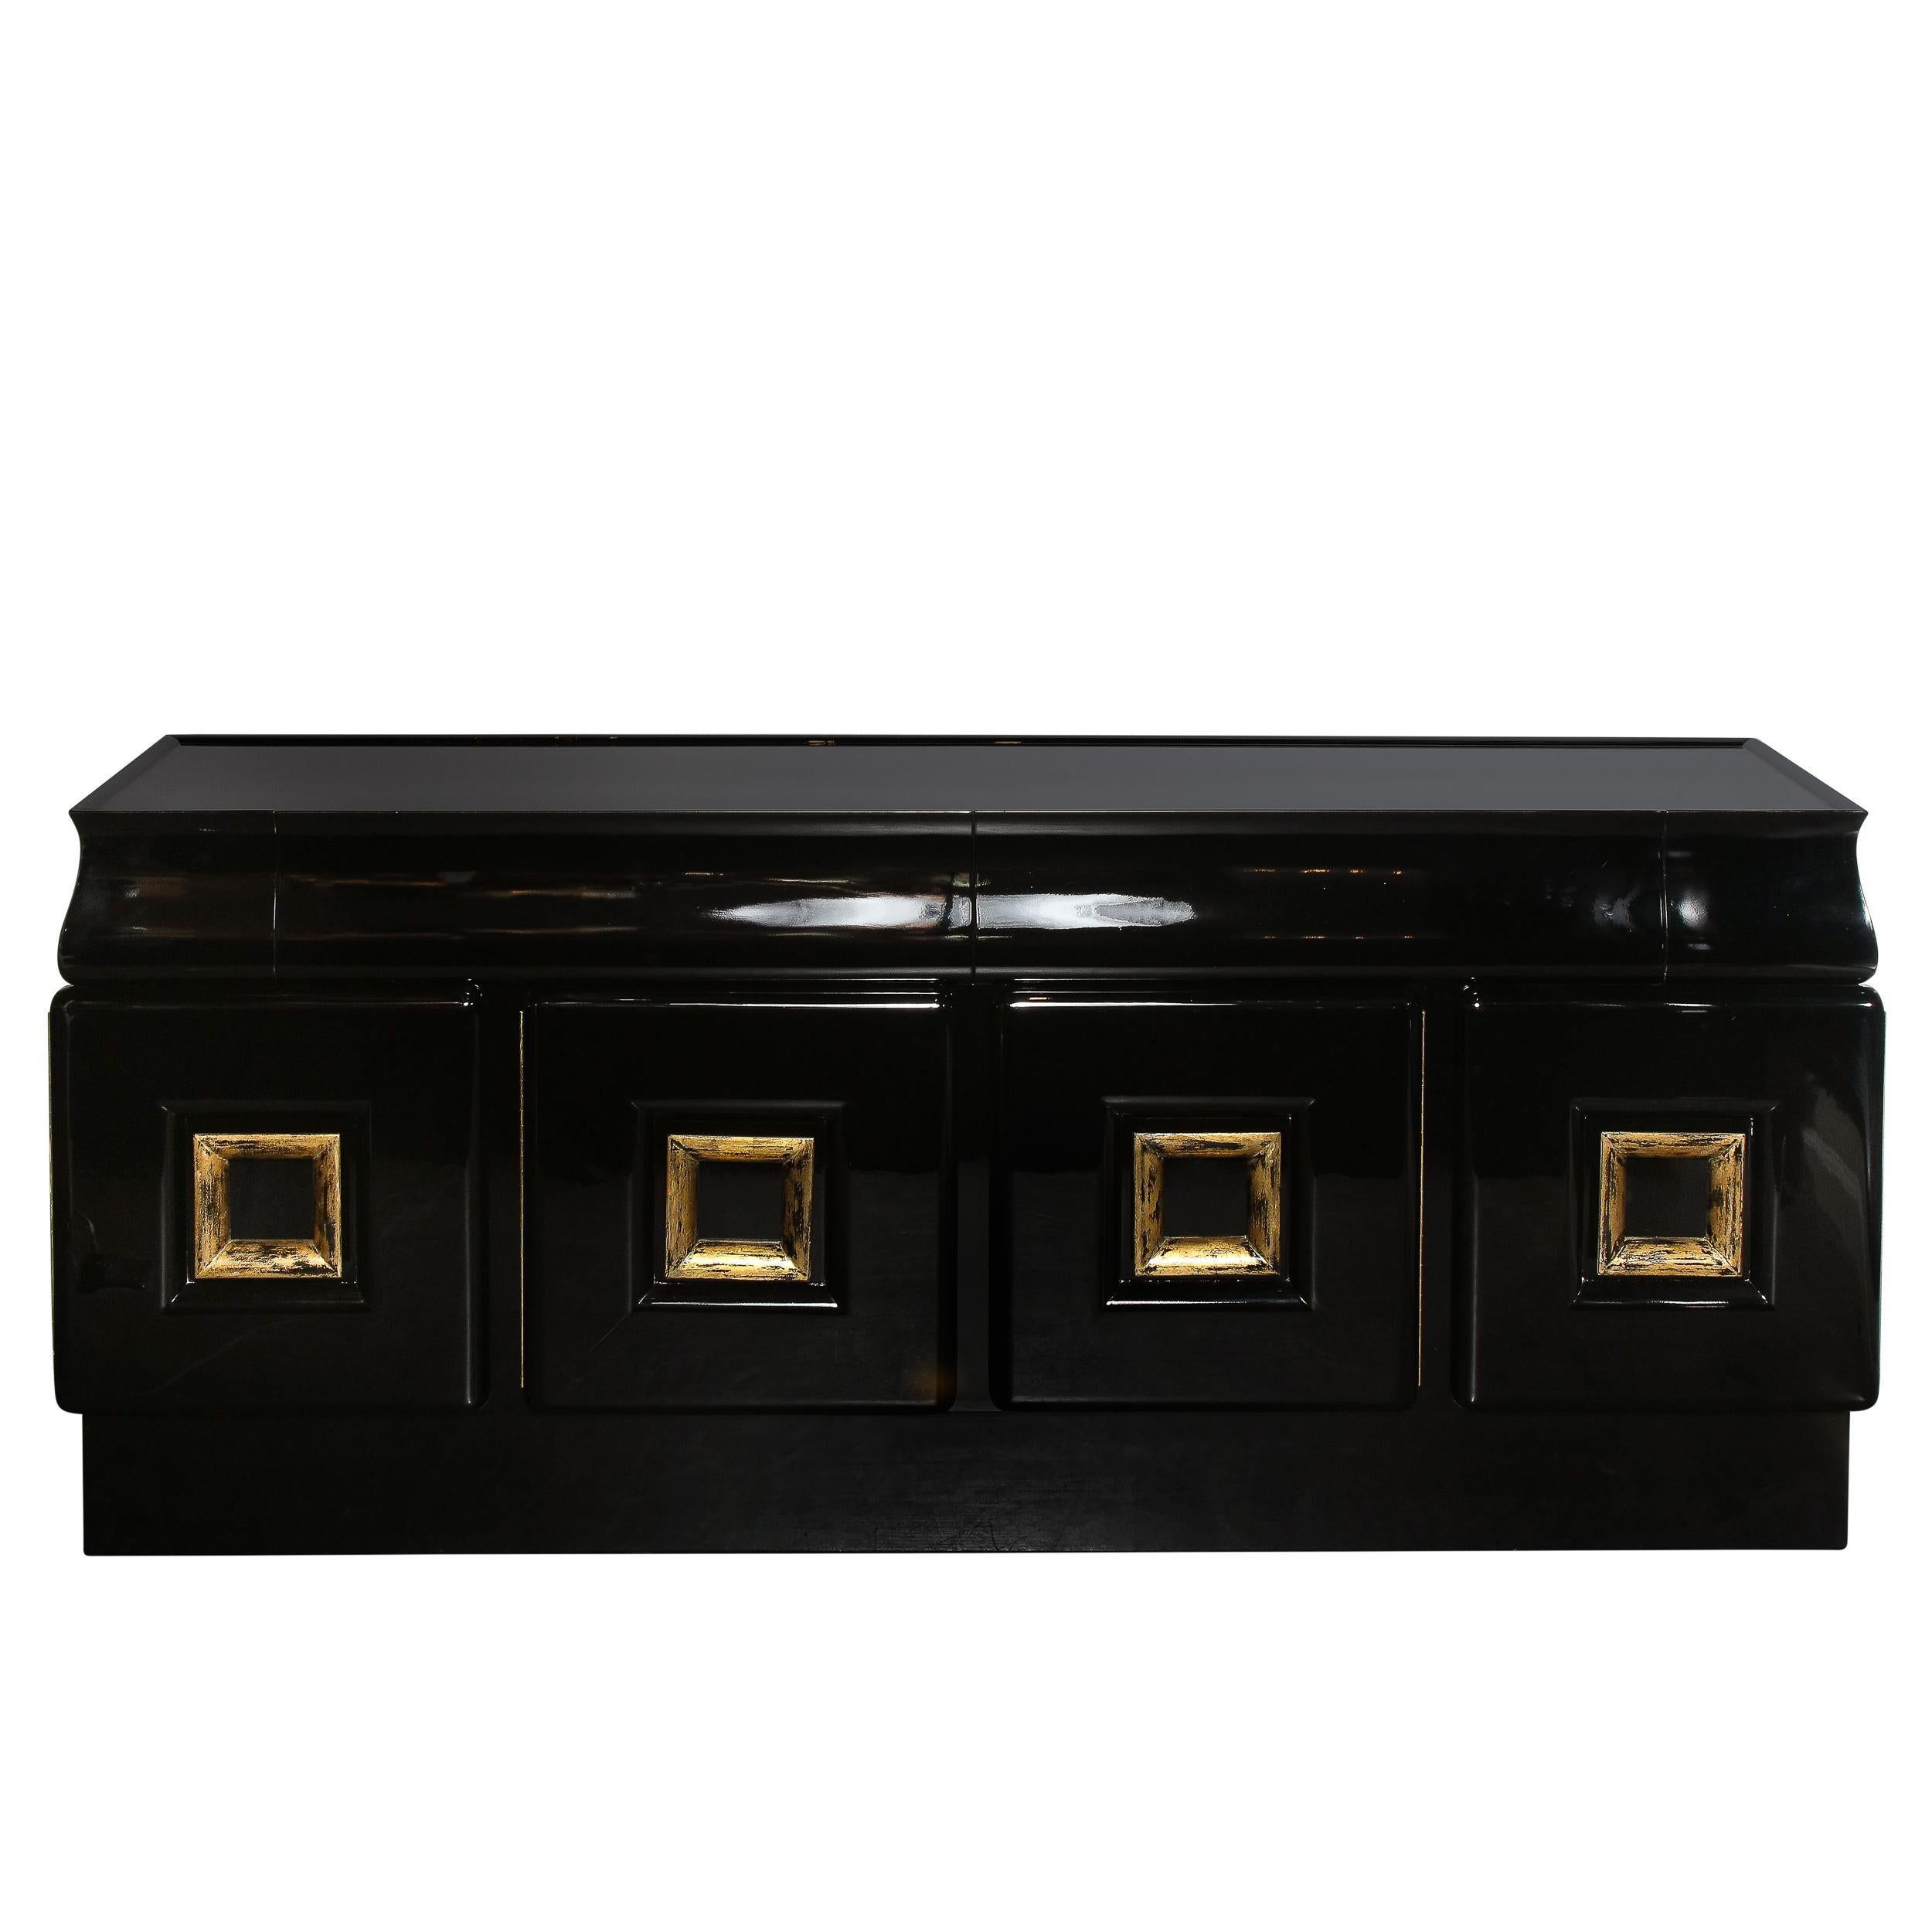 This sideboard, signed by the illustrious 20th century designer James Mont, has an impact rarely seen. Bold and forward facing, this sideboard is beautifully restored in gleaming Black Lacquer with original gilded wood surfacing on each of the four